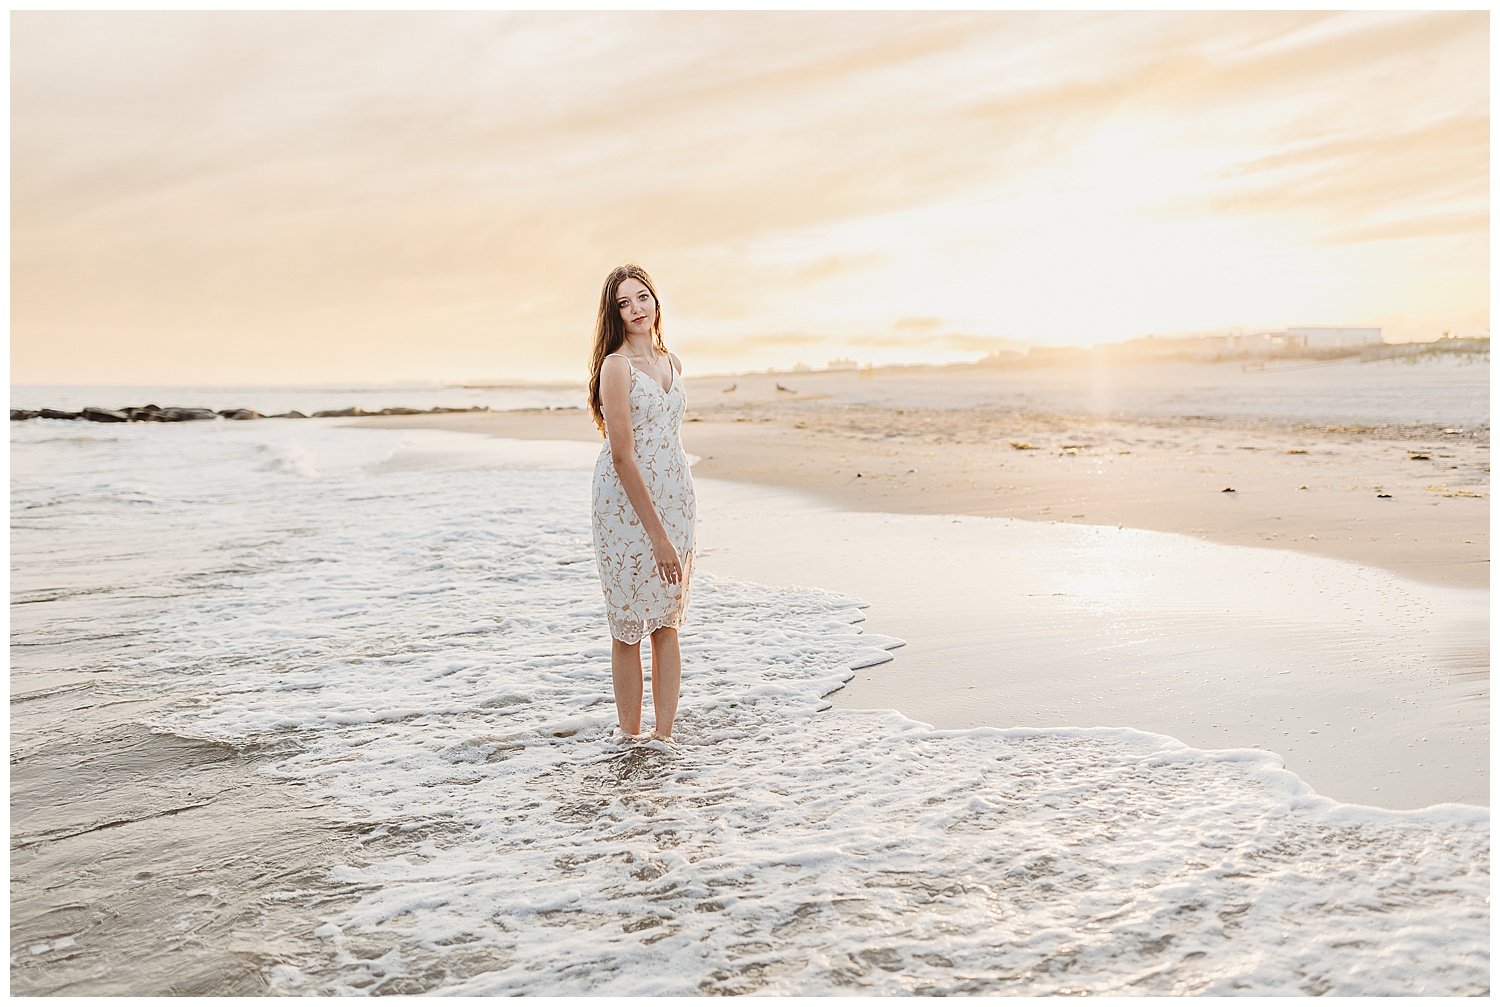 25 Family poses for a beach photo session | 30A Photographer